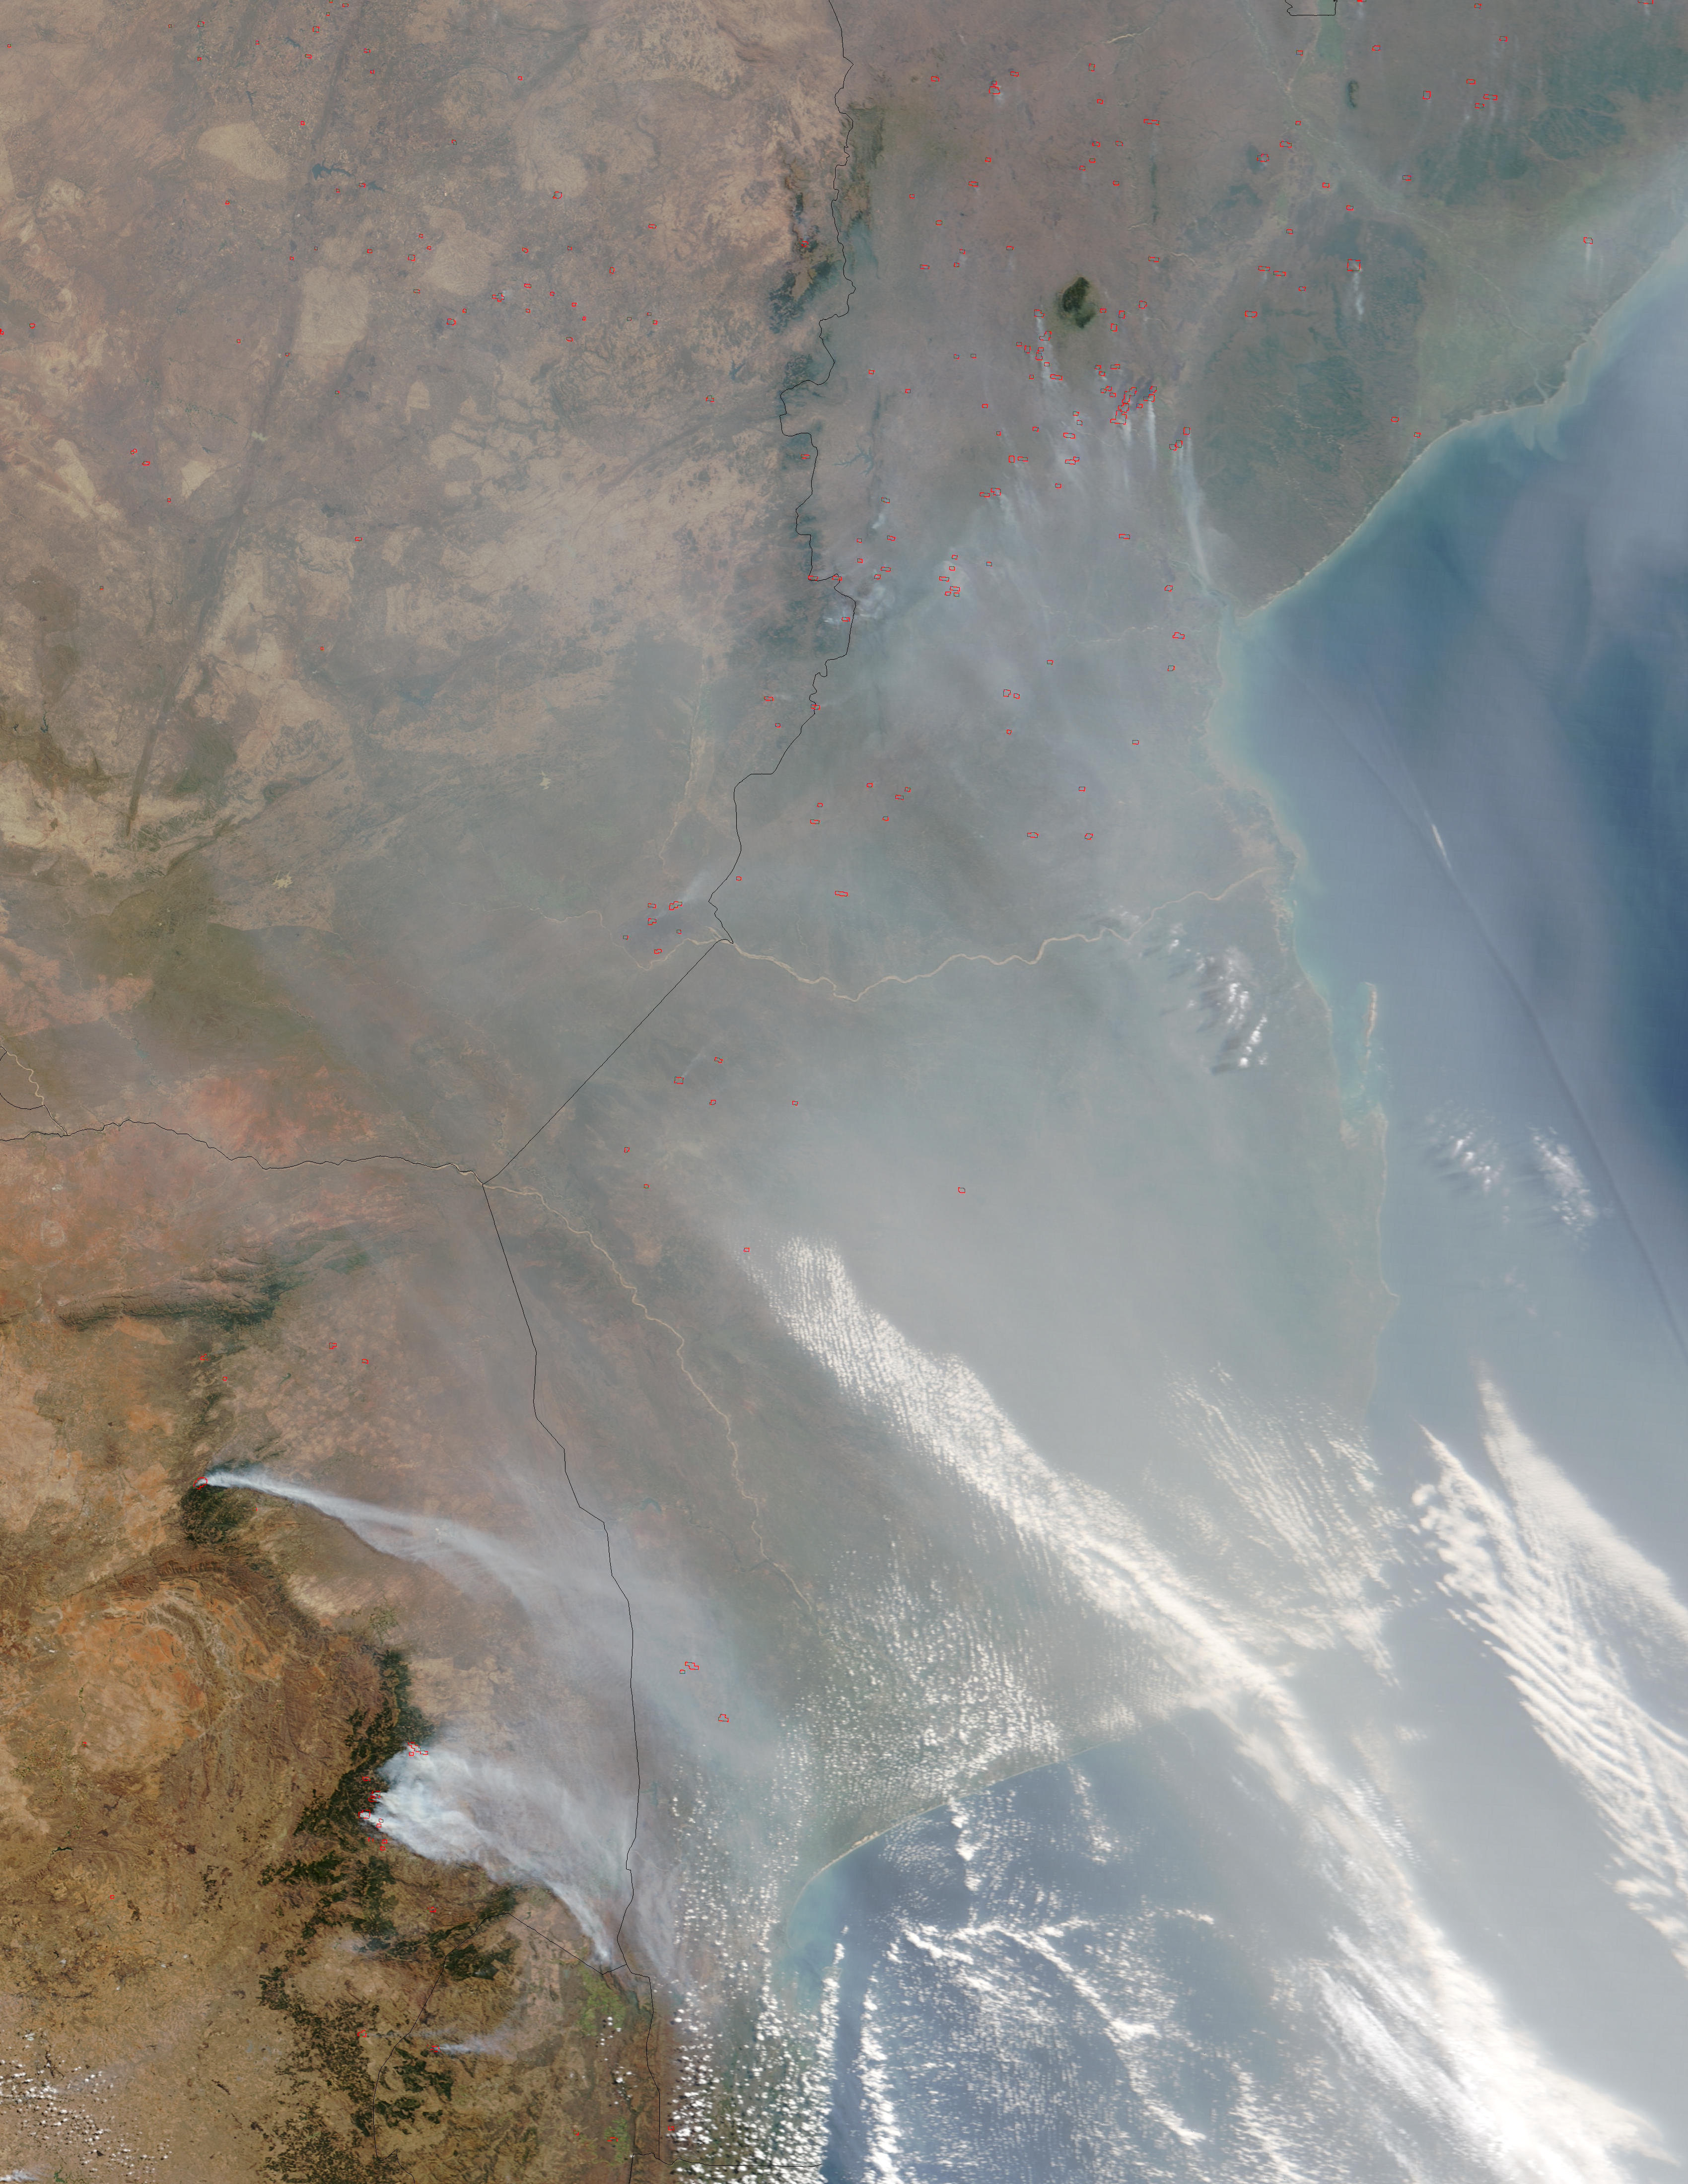 Fires and smoke in South Africa and Mozambique - related image preview